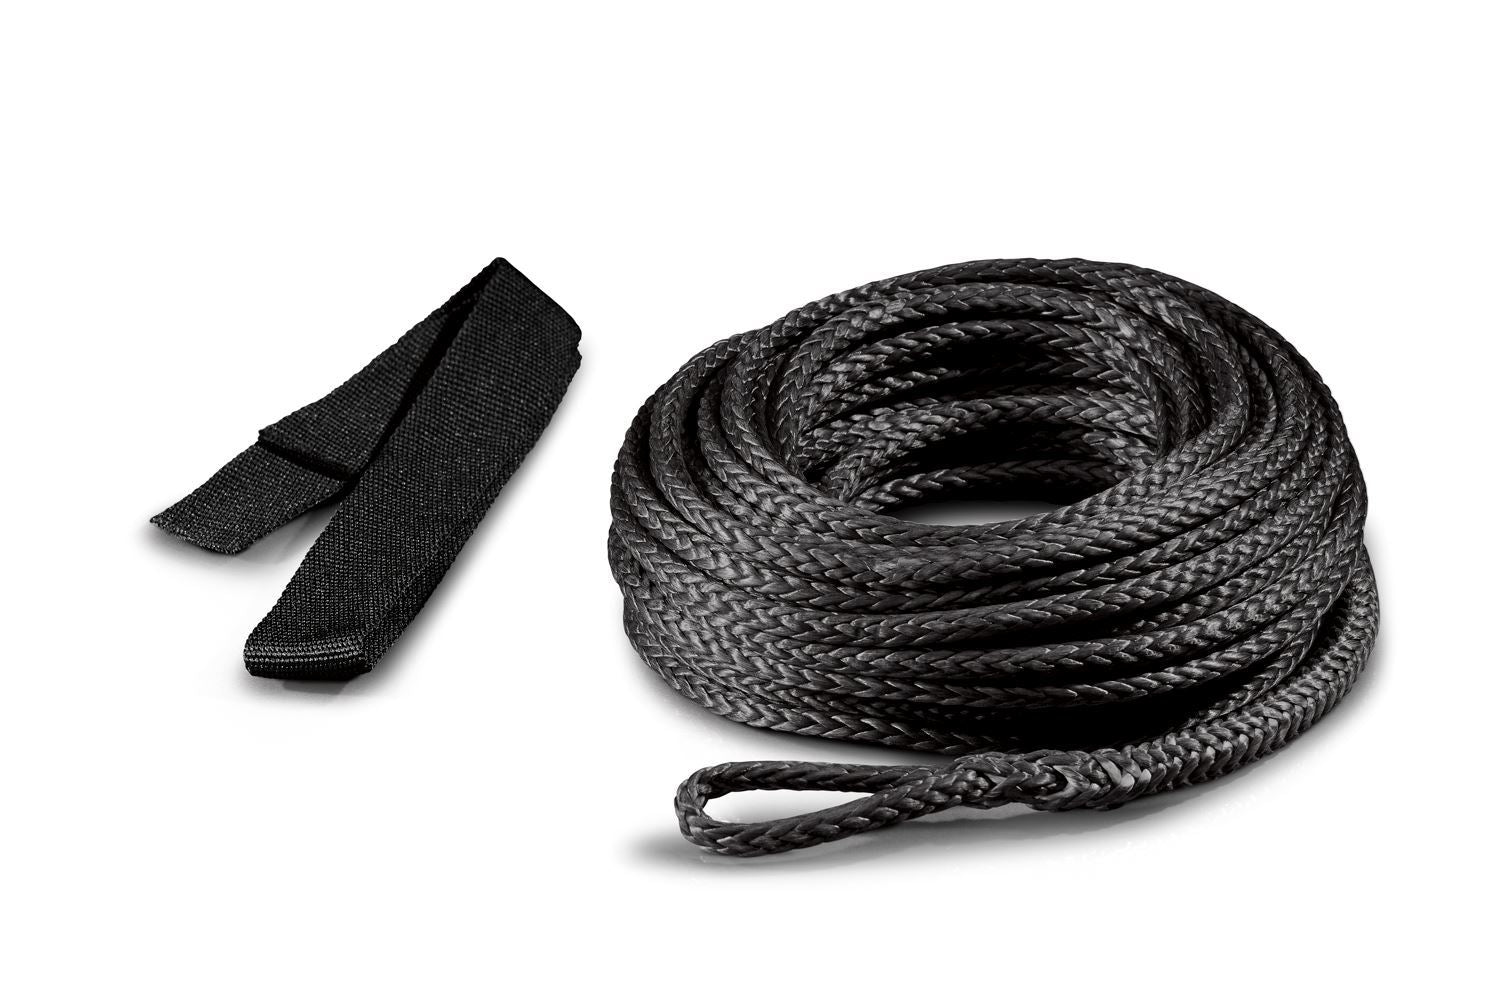 WARN Synthetic Rope Replacement Kit, 3/16in x 50ft